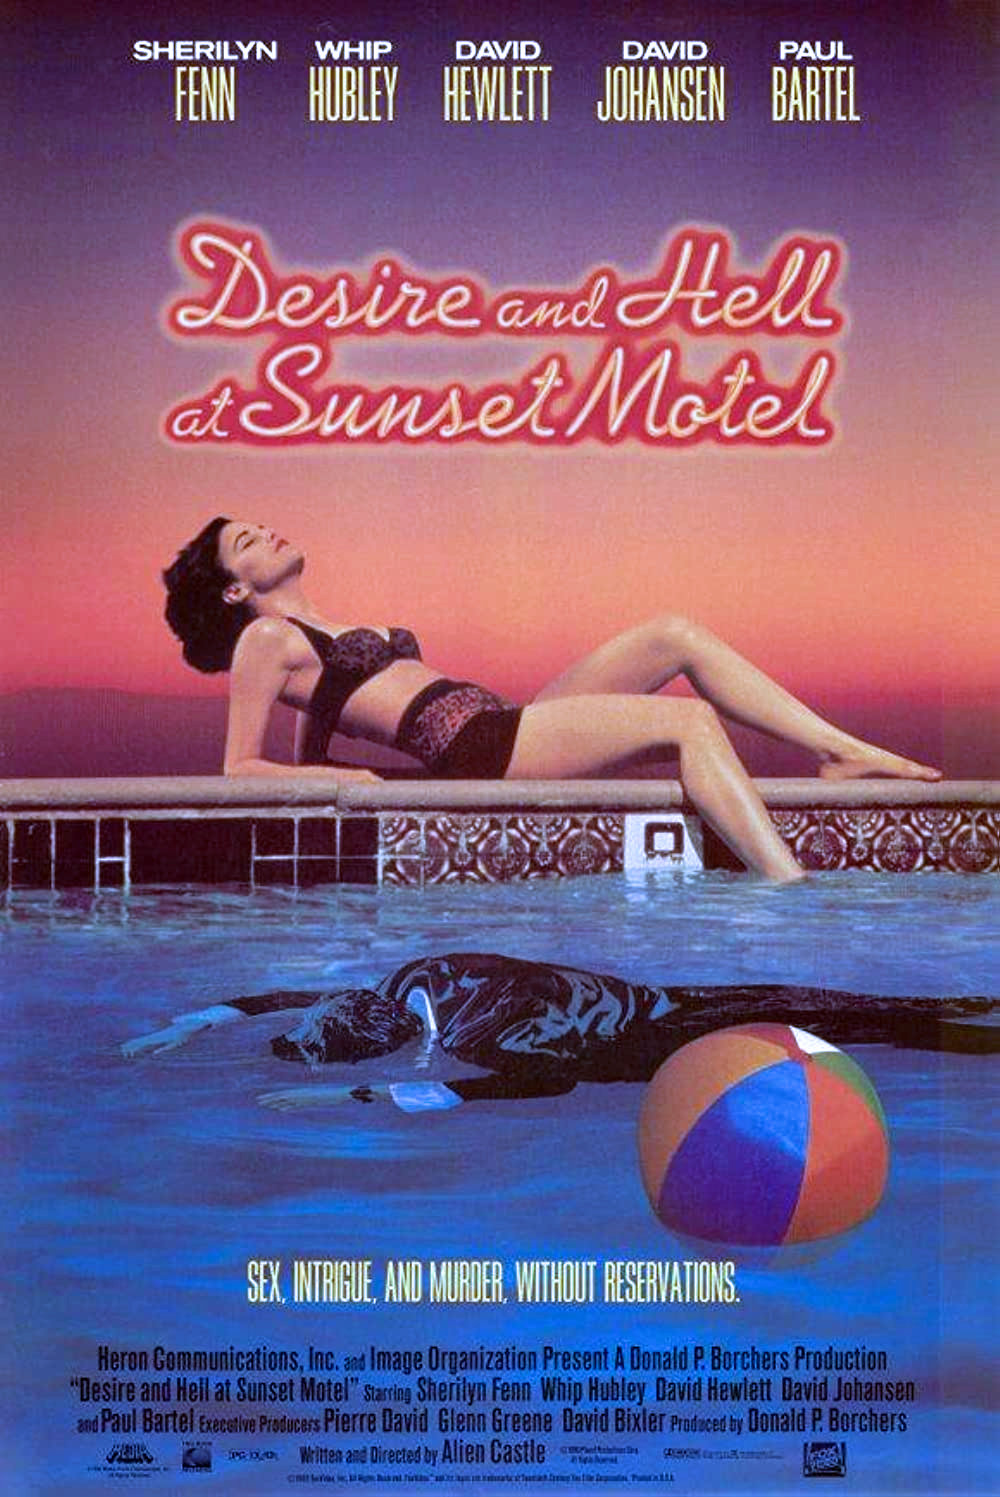 Desire and Hell at Sunset Hotel - DVD cover 01
Keywords: desire_and_hell_media;media_cover